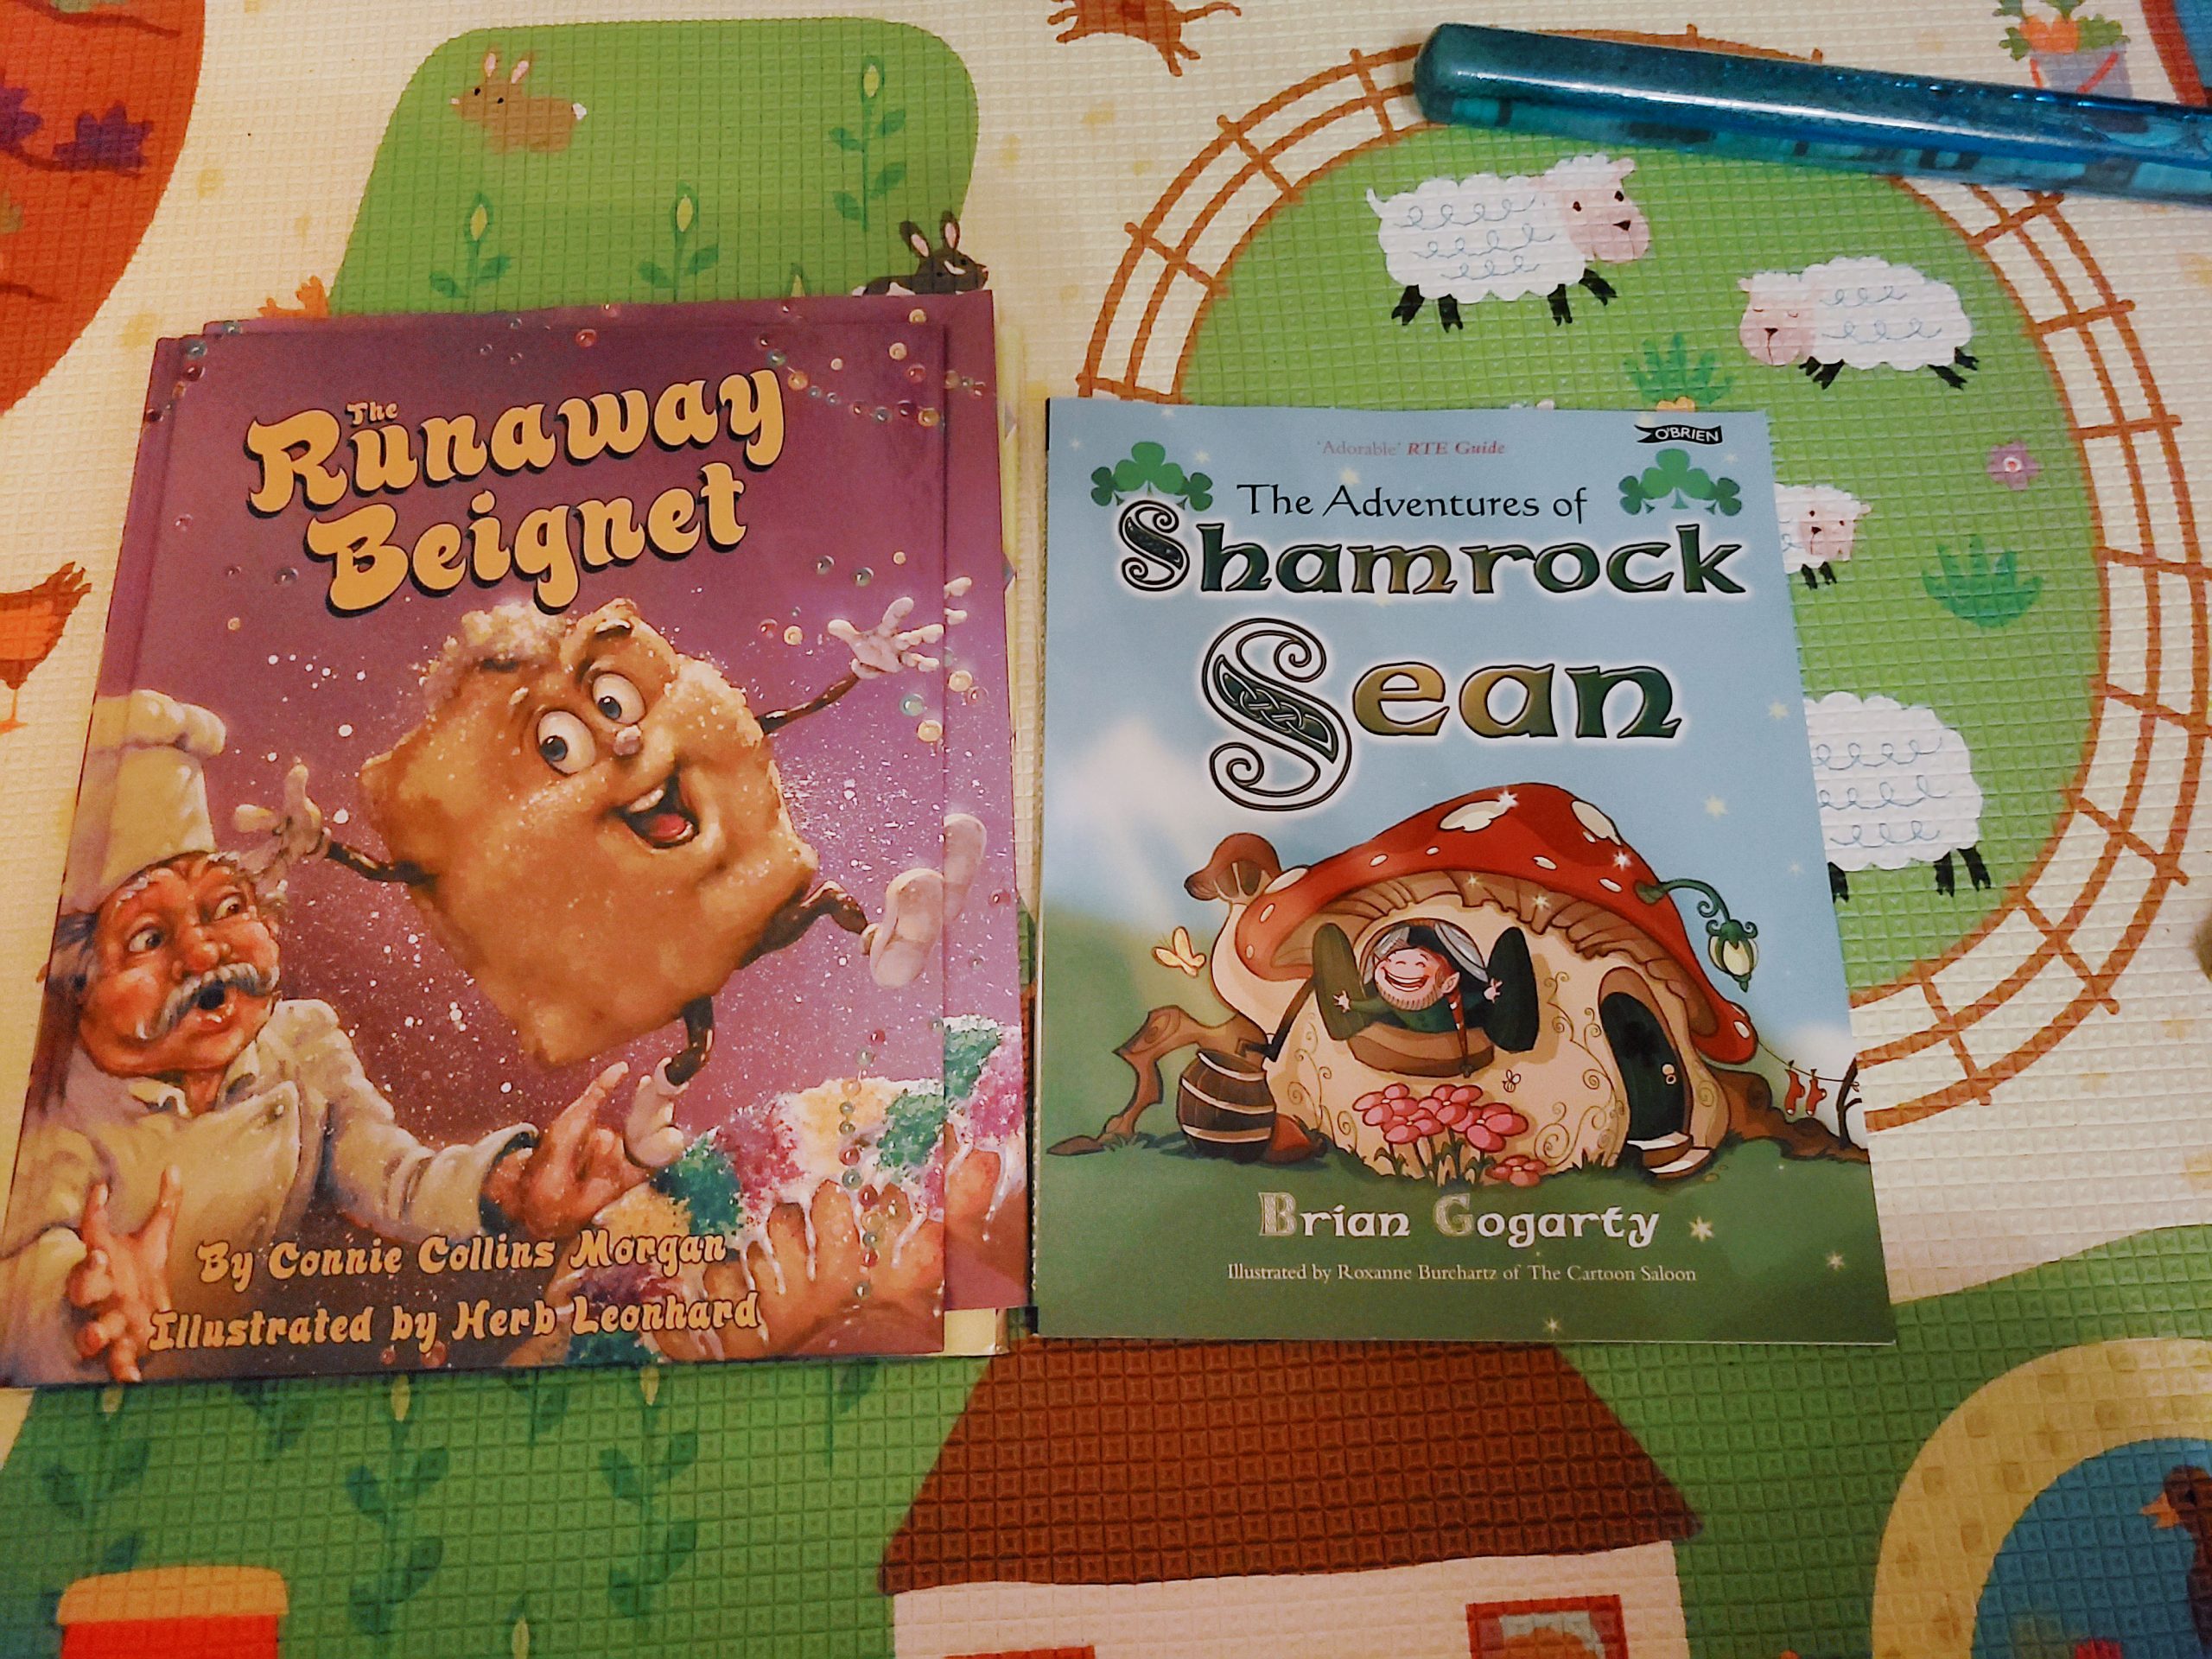 travel books for babies